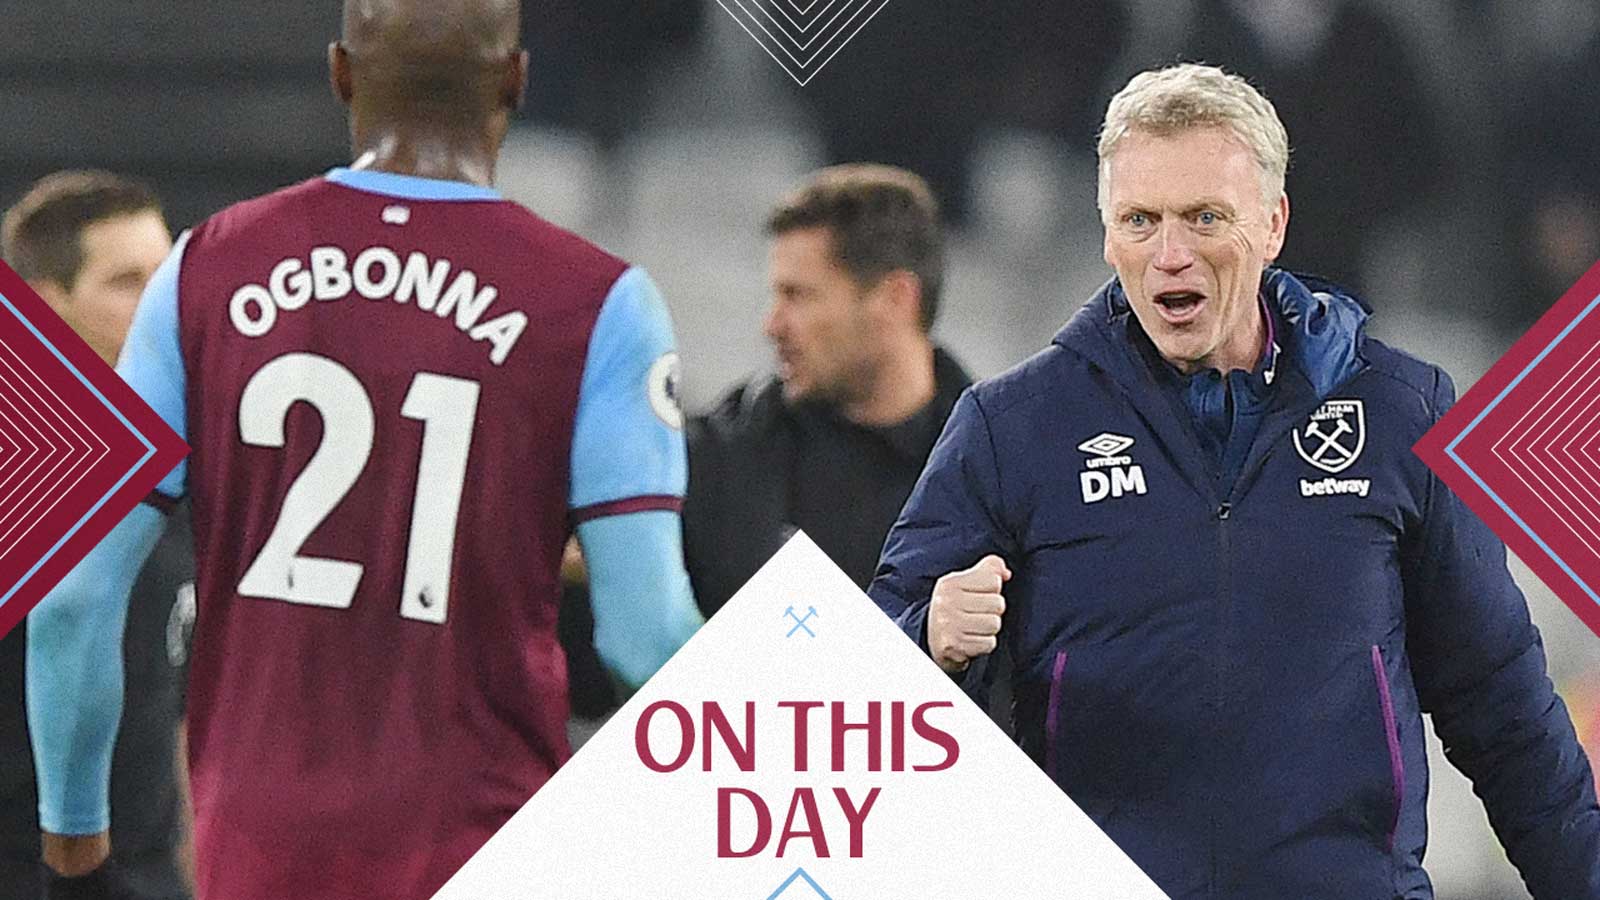 David Moyes celebrates the win over Bournemouth with Angelo Ogbonna